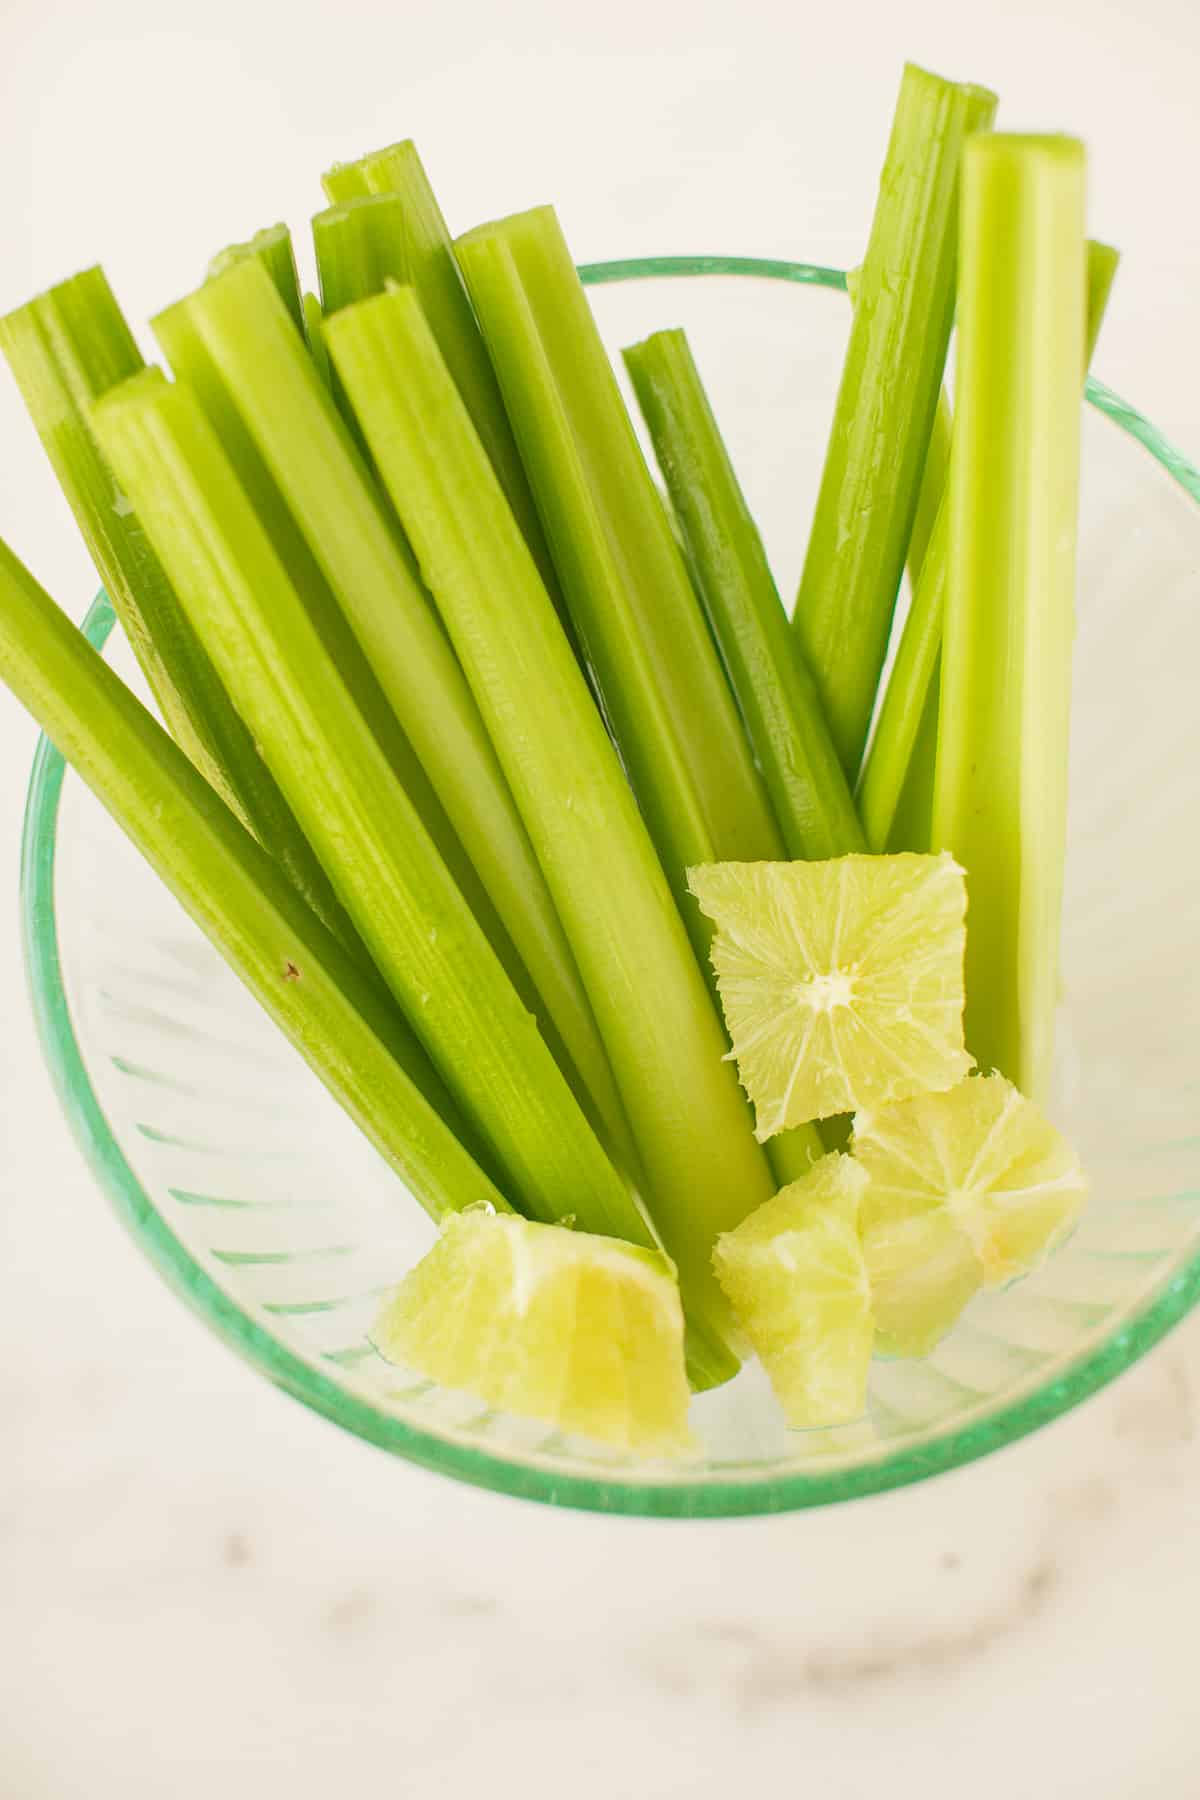 celery stalks and peeled limes in a bow